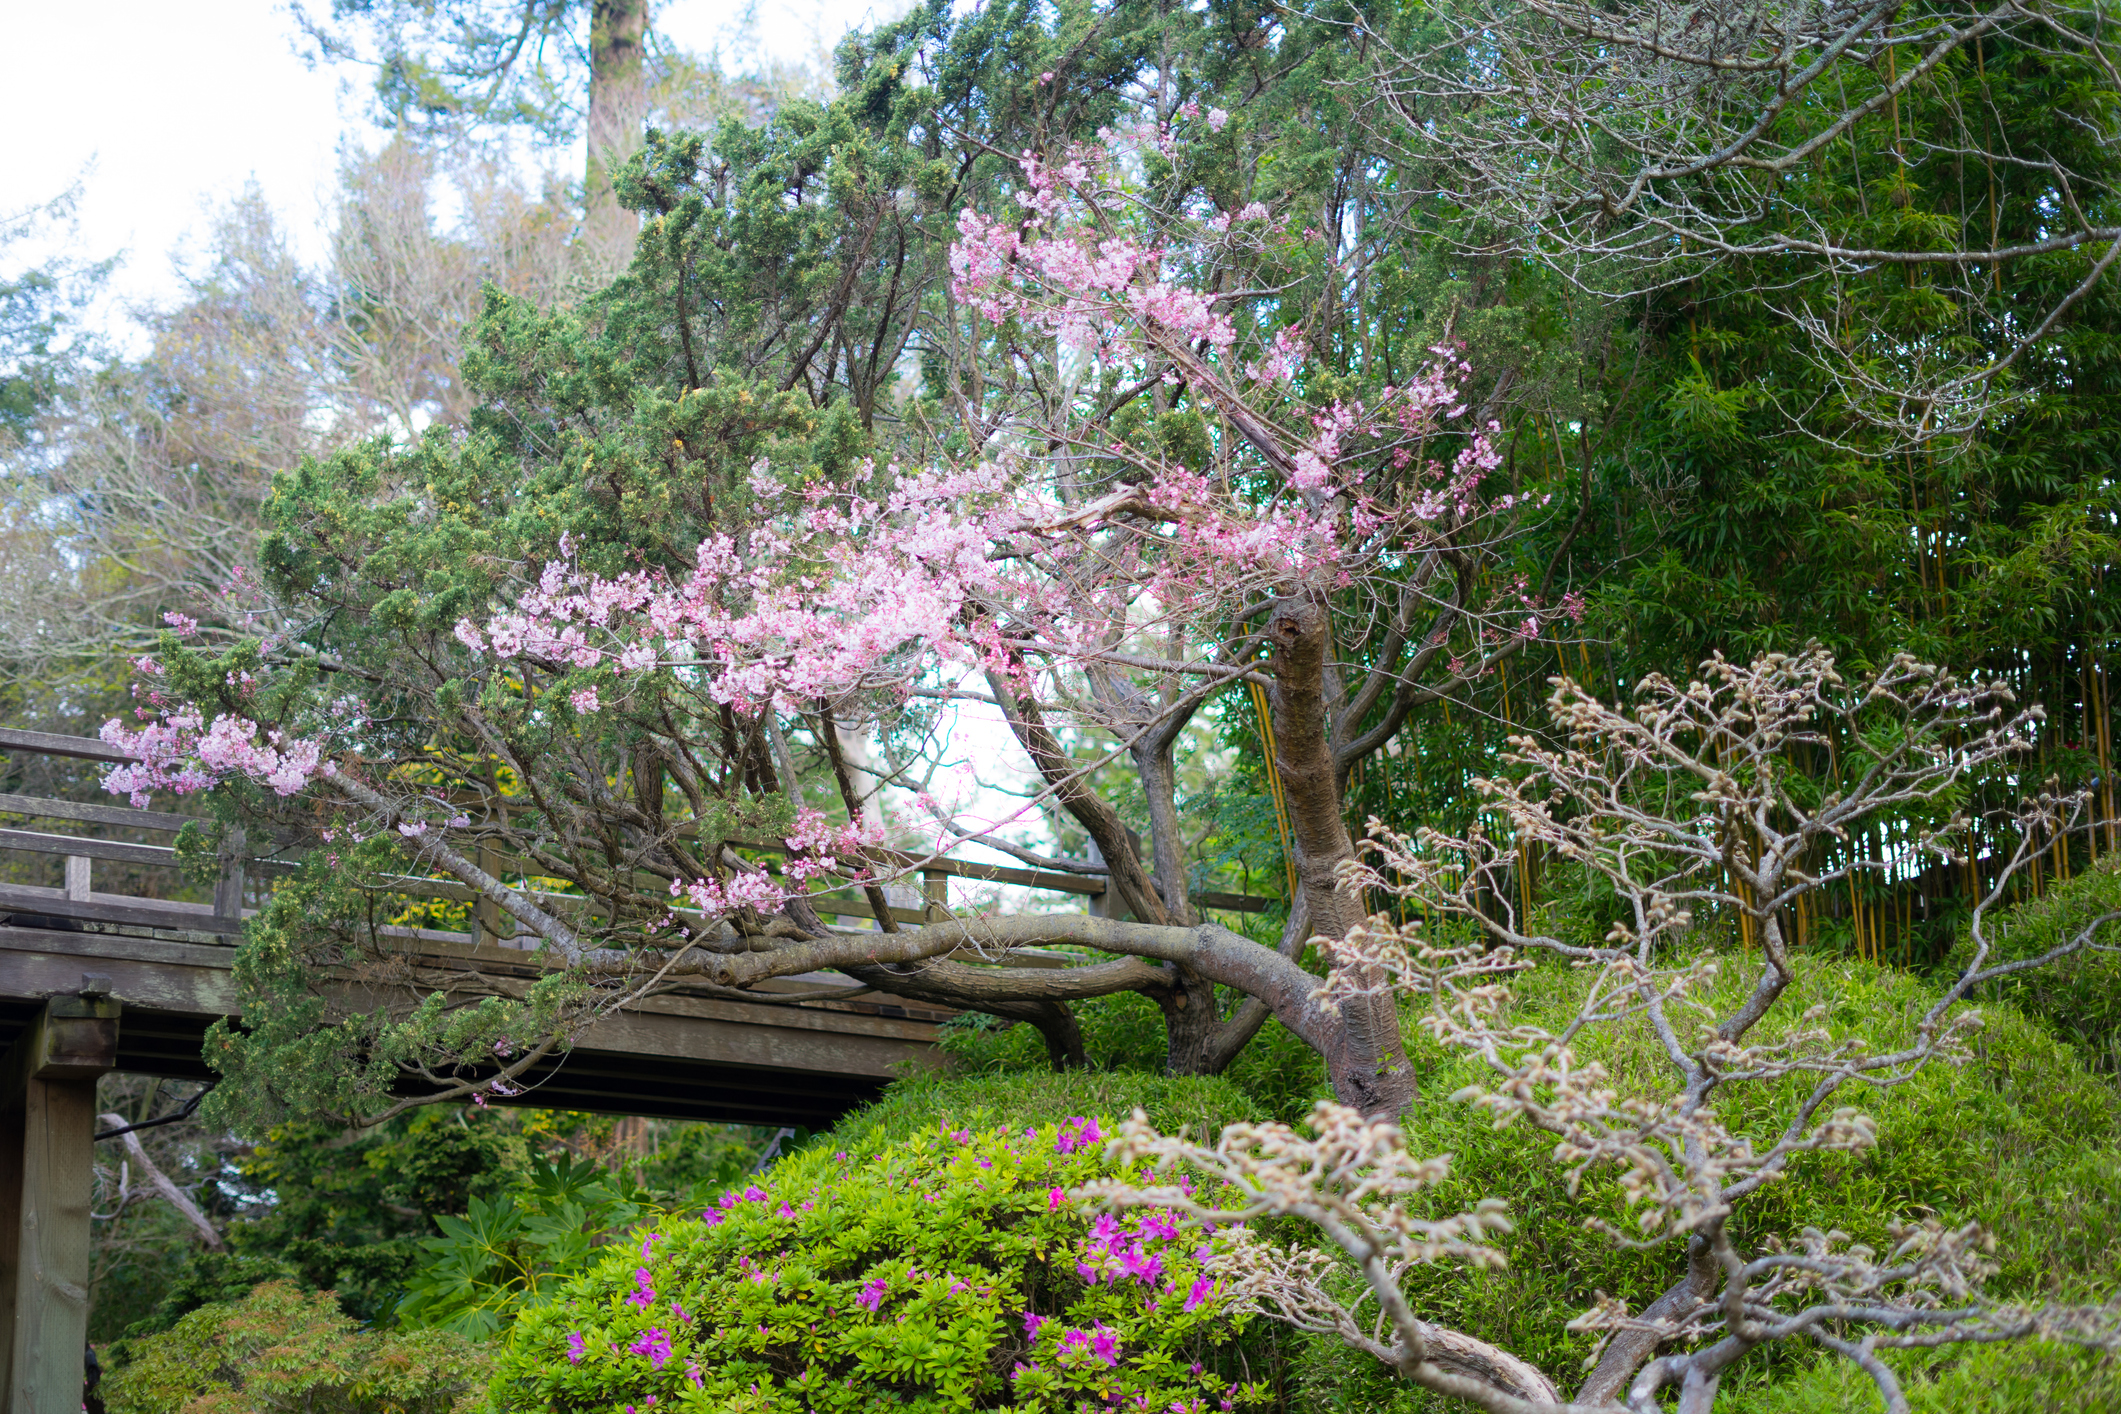 <p>A prime spot to view the cherry blossom blooms in California is the Japanese Tea Garden in Golden Gate Park in San Fransisco. Here, the cherry blossoms are in full bloom from March through April.</p><p>Sharks, lions, alligators, and more! Don’t miss today’s latest and most exciting animal news. <strong><a href="https://www.msn.com/en-us/channel/source/AZ%20Animals%20US/sr-vid-7etr9q8xun6k6508c3nufaum0de3dqktiq6h27ddeagnfug30wka">Click here to access the A-Z Animals profile page</a> and be sure to hit the <em>Follow</em> button here or at the top of this article!</strong></p> <p>Have feedback? Add a comment below!</p>